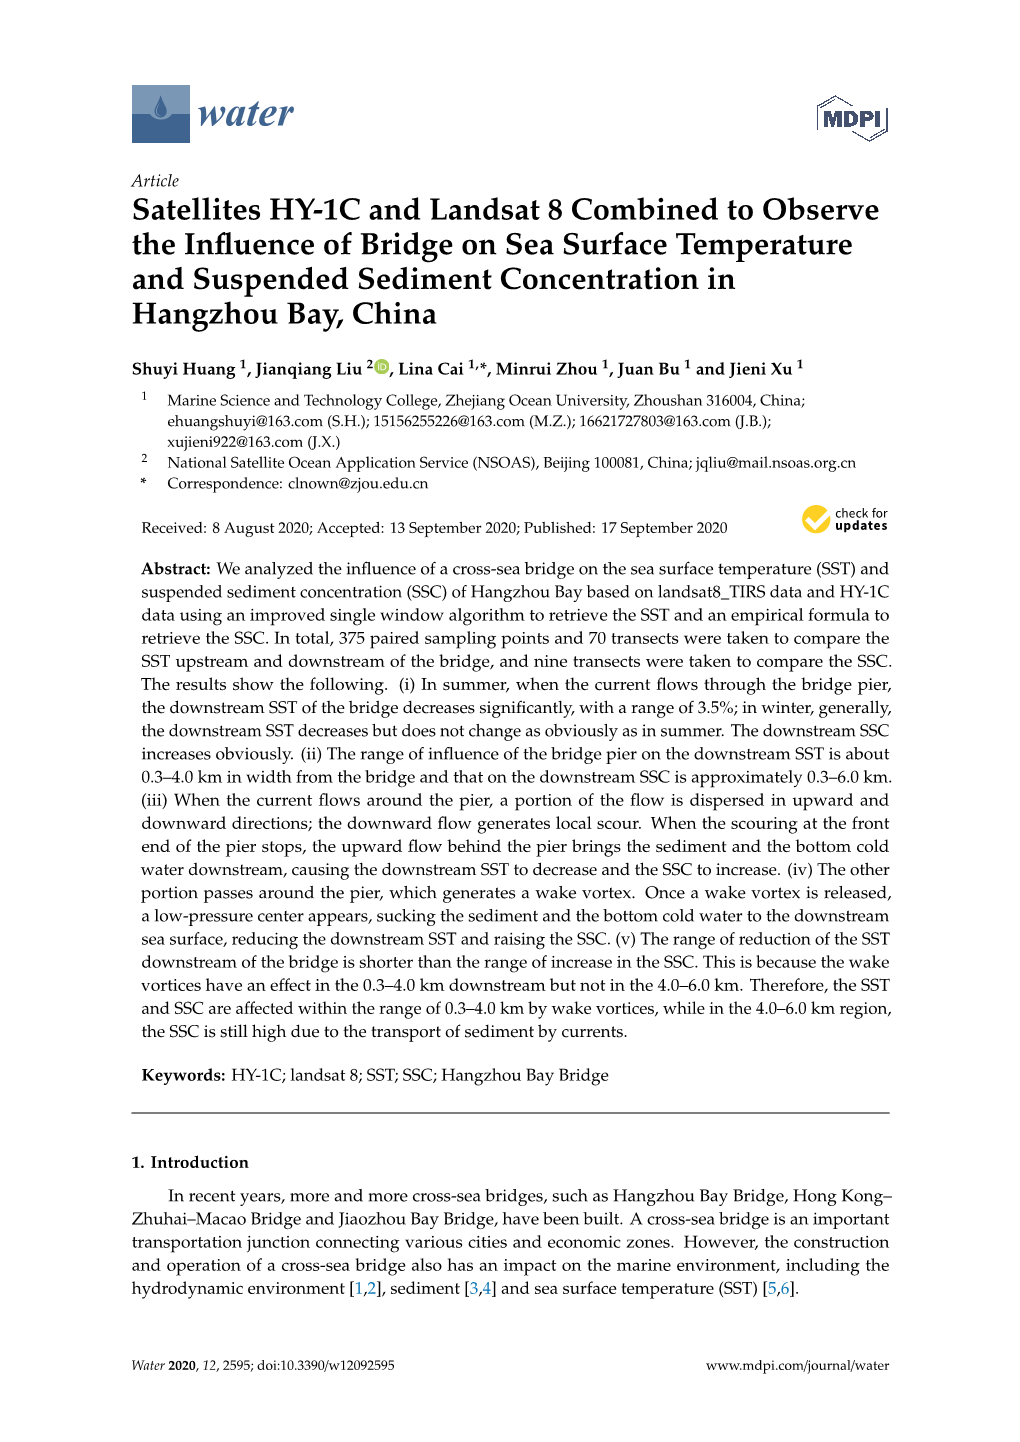 Satellites HY-1C and Landsat 8 Combined to Observe the Inﬂuence of Bridge on Sea Surface Temperature and Suspended Sediment Concentration in Hangzhou Bay, China